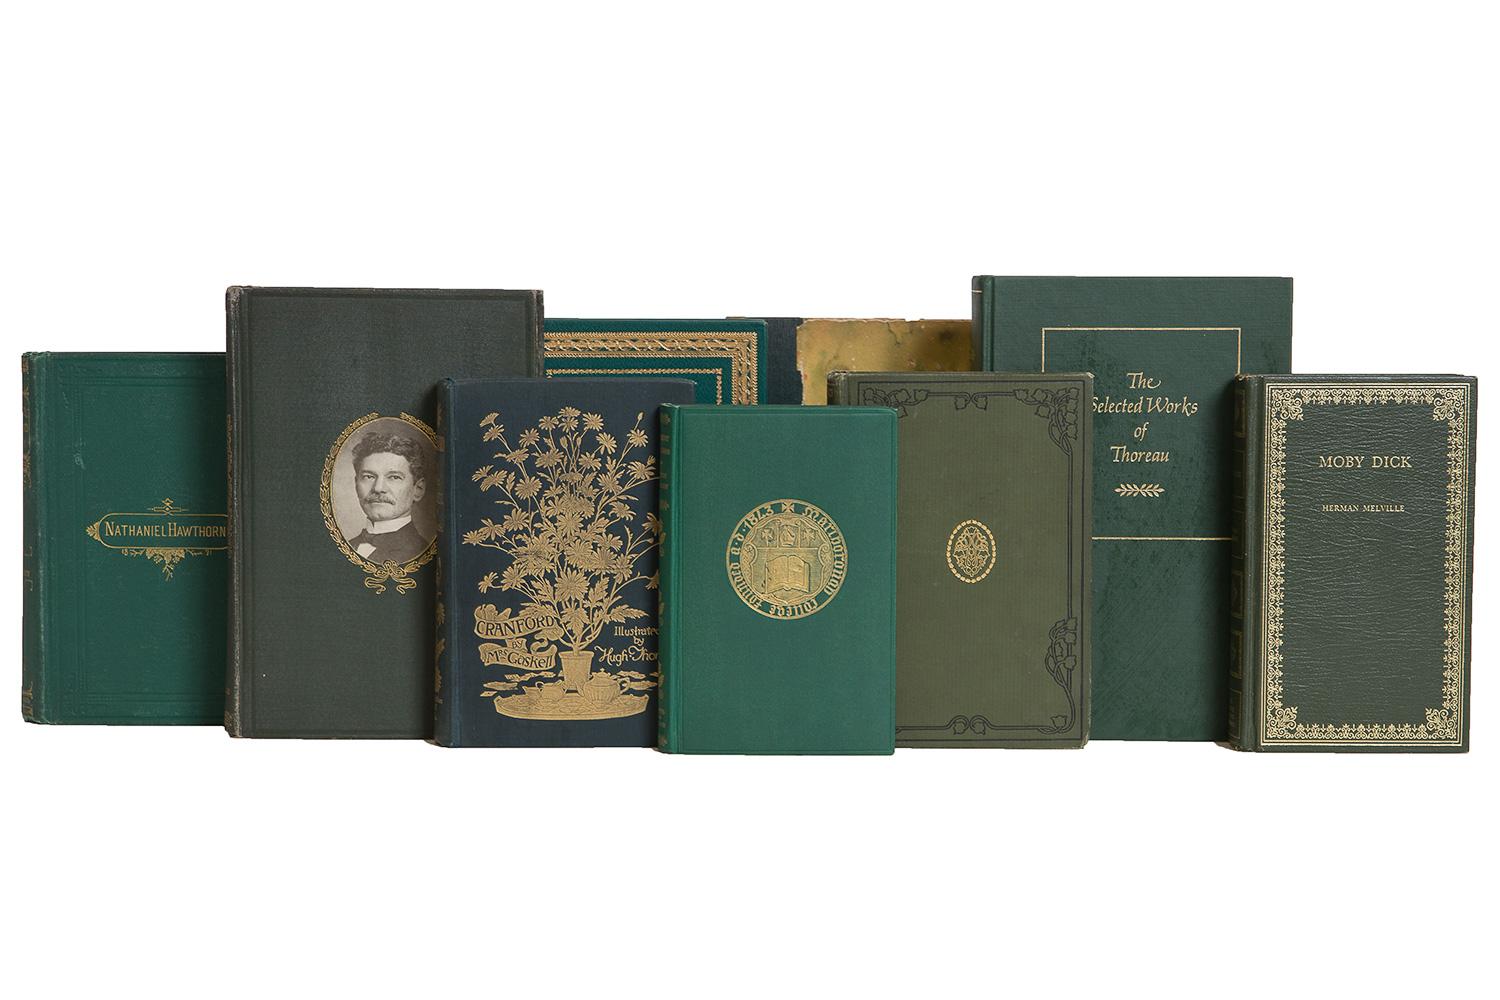 Features a blend of 20 authentic midcentury books published, 1940-1969. Includes a variety of literary classics by Kipling, Thoreau, Melville, and more in blended shades of green with heavy gold gilded spines. Select titles feature gilded and